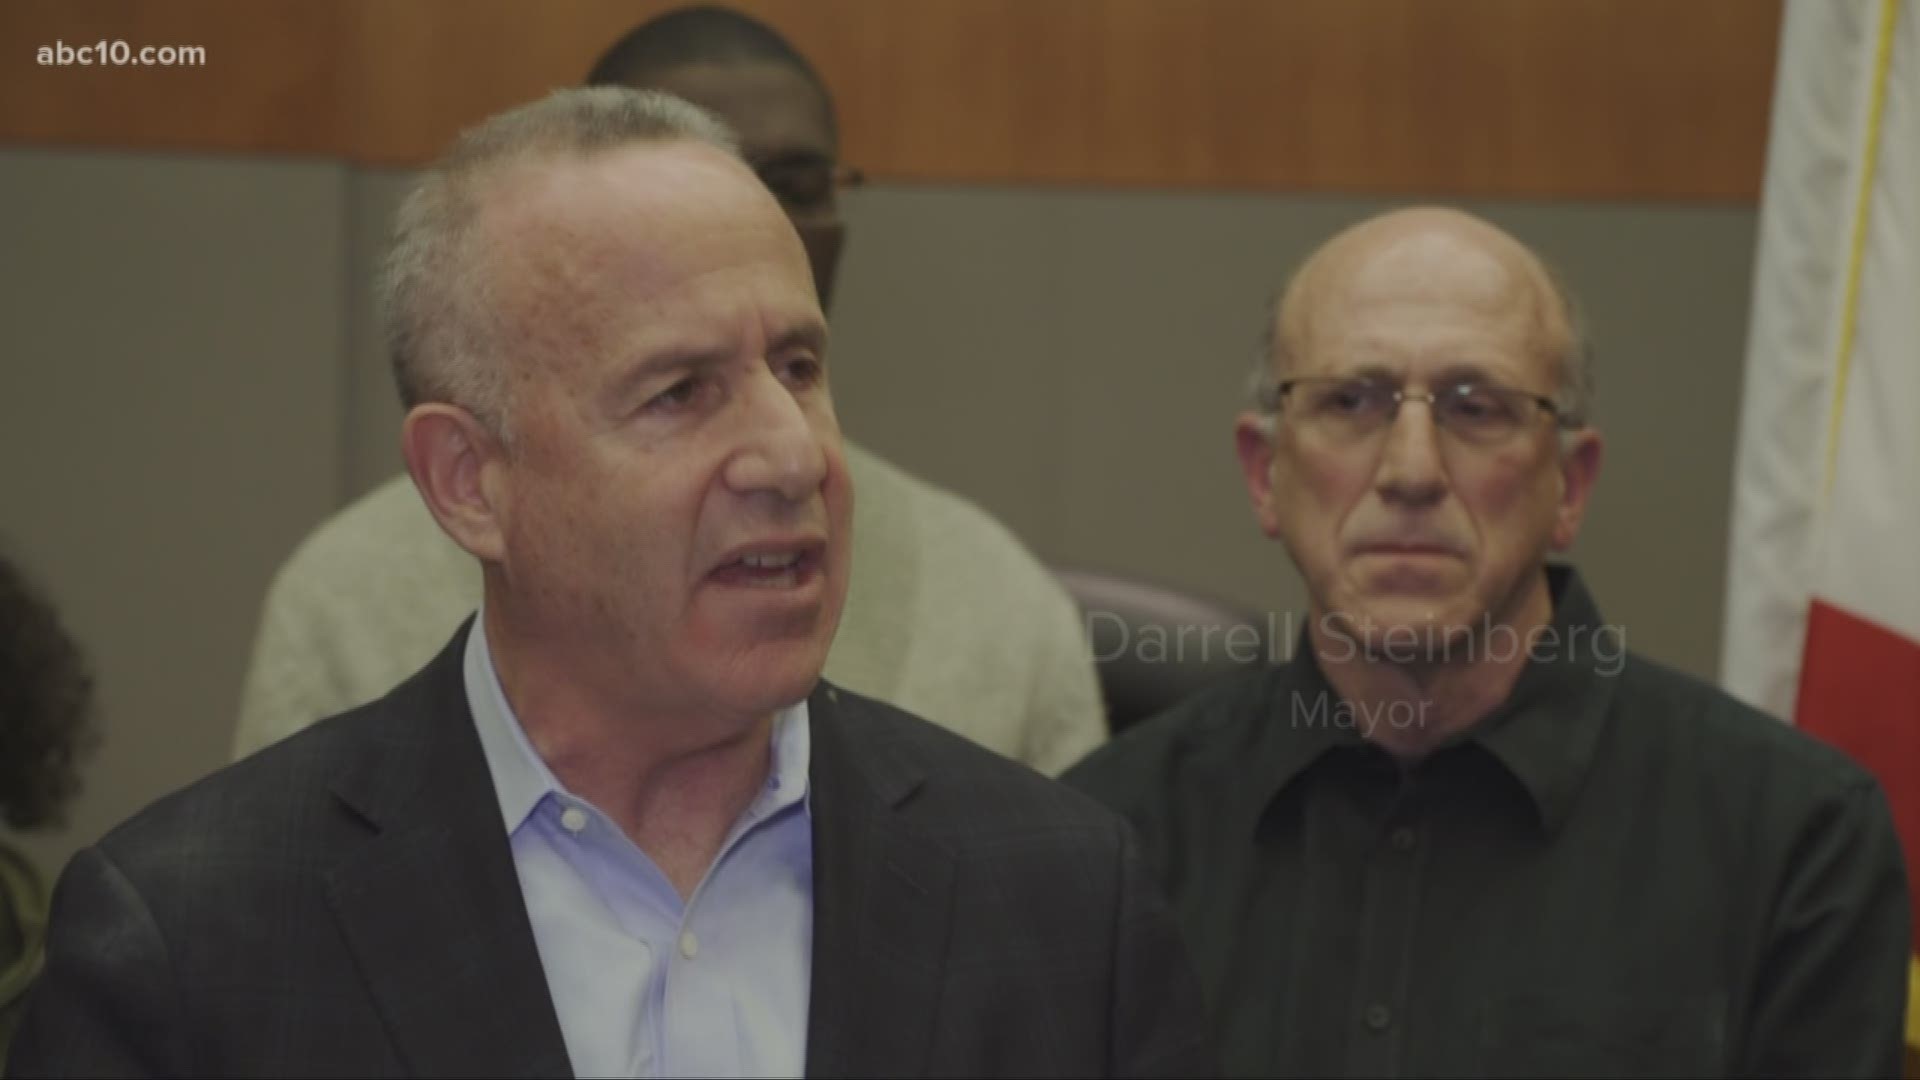 "The outcome was wrong, he should not have died," Mayor Darrell Steinberg said Saturday, moments after District Attorney Anne Marie Schubert announced officers involved in the shooting death of Stephon Clark would not be criminally charged.